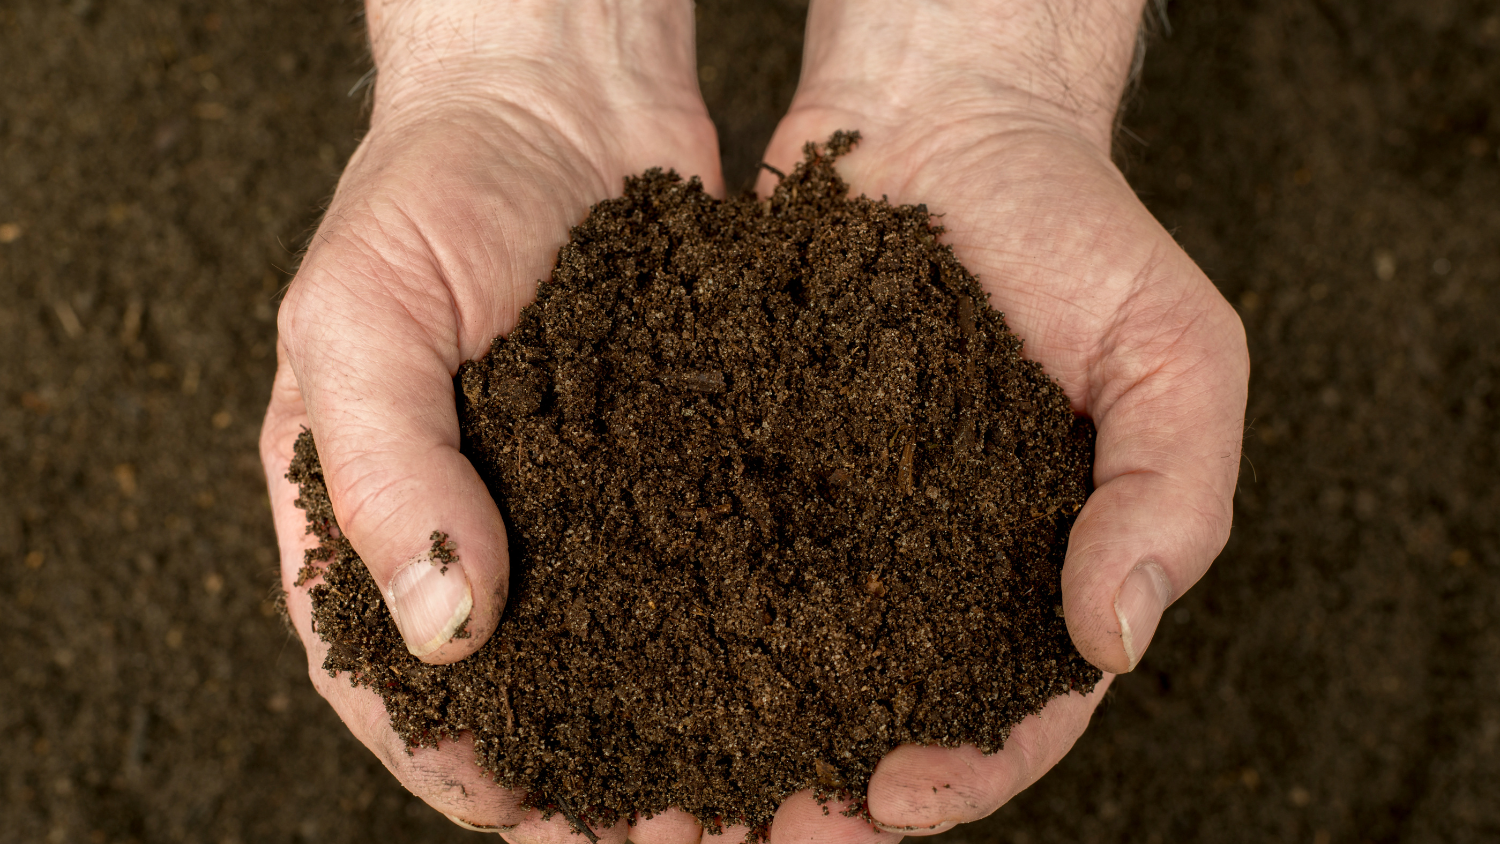 A close-up photo of two hands holding soil.